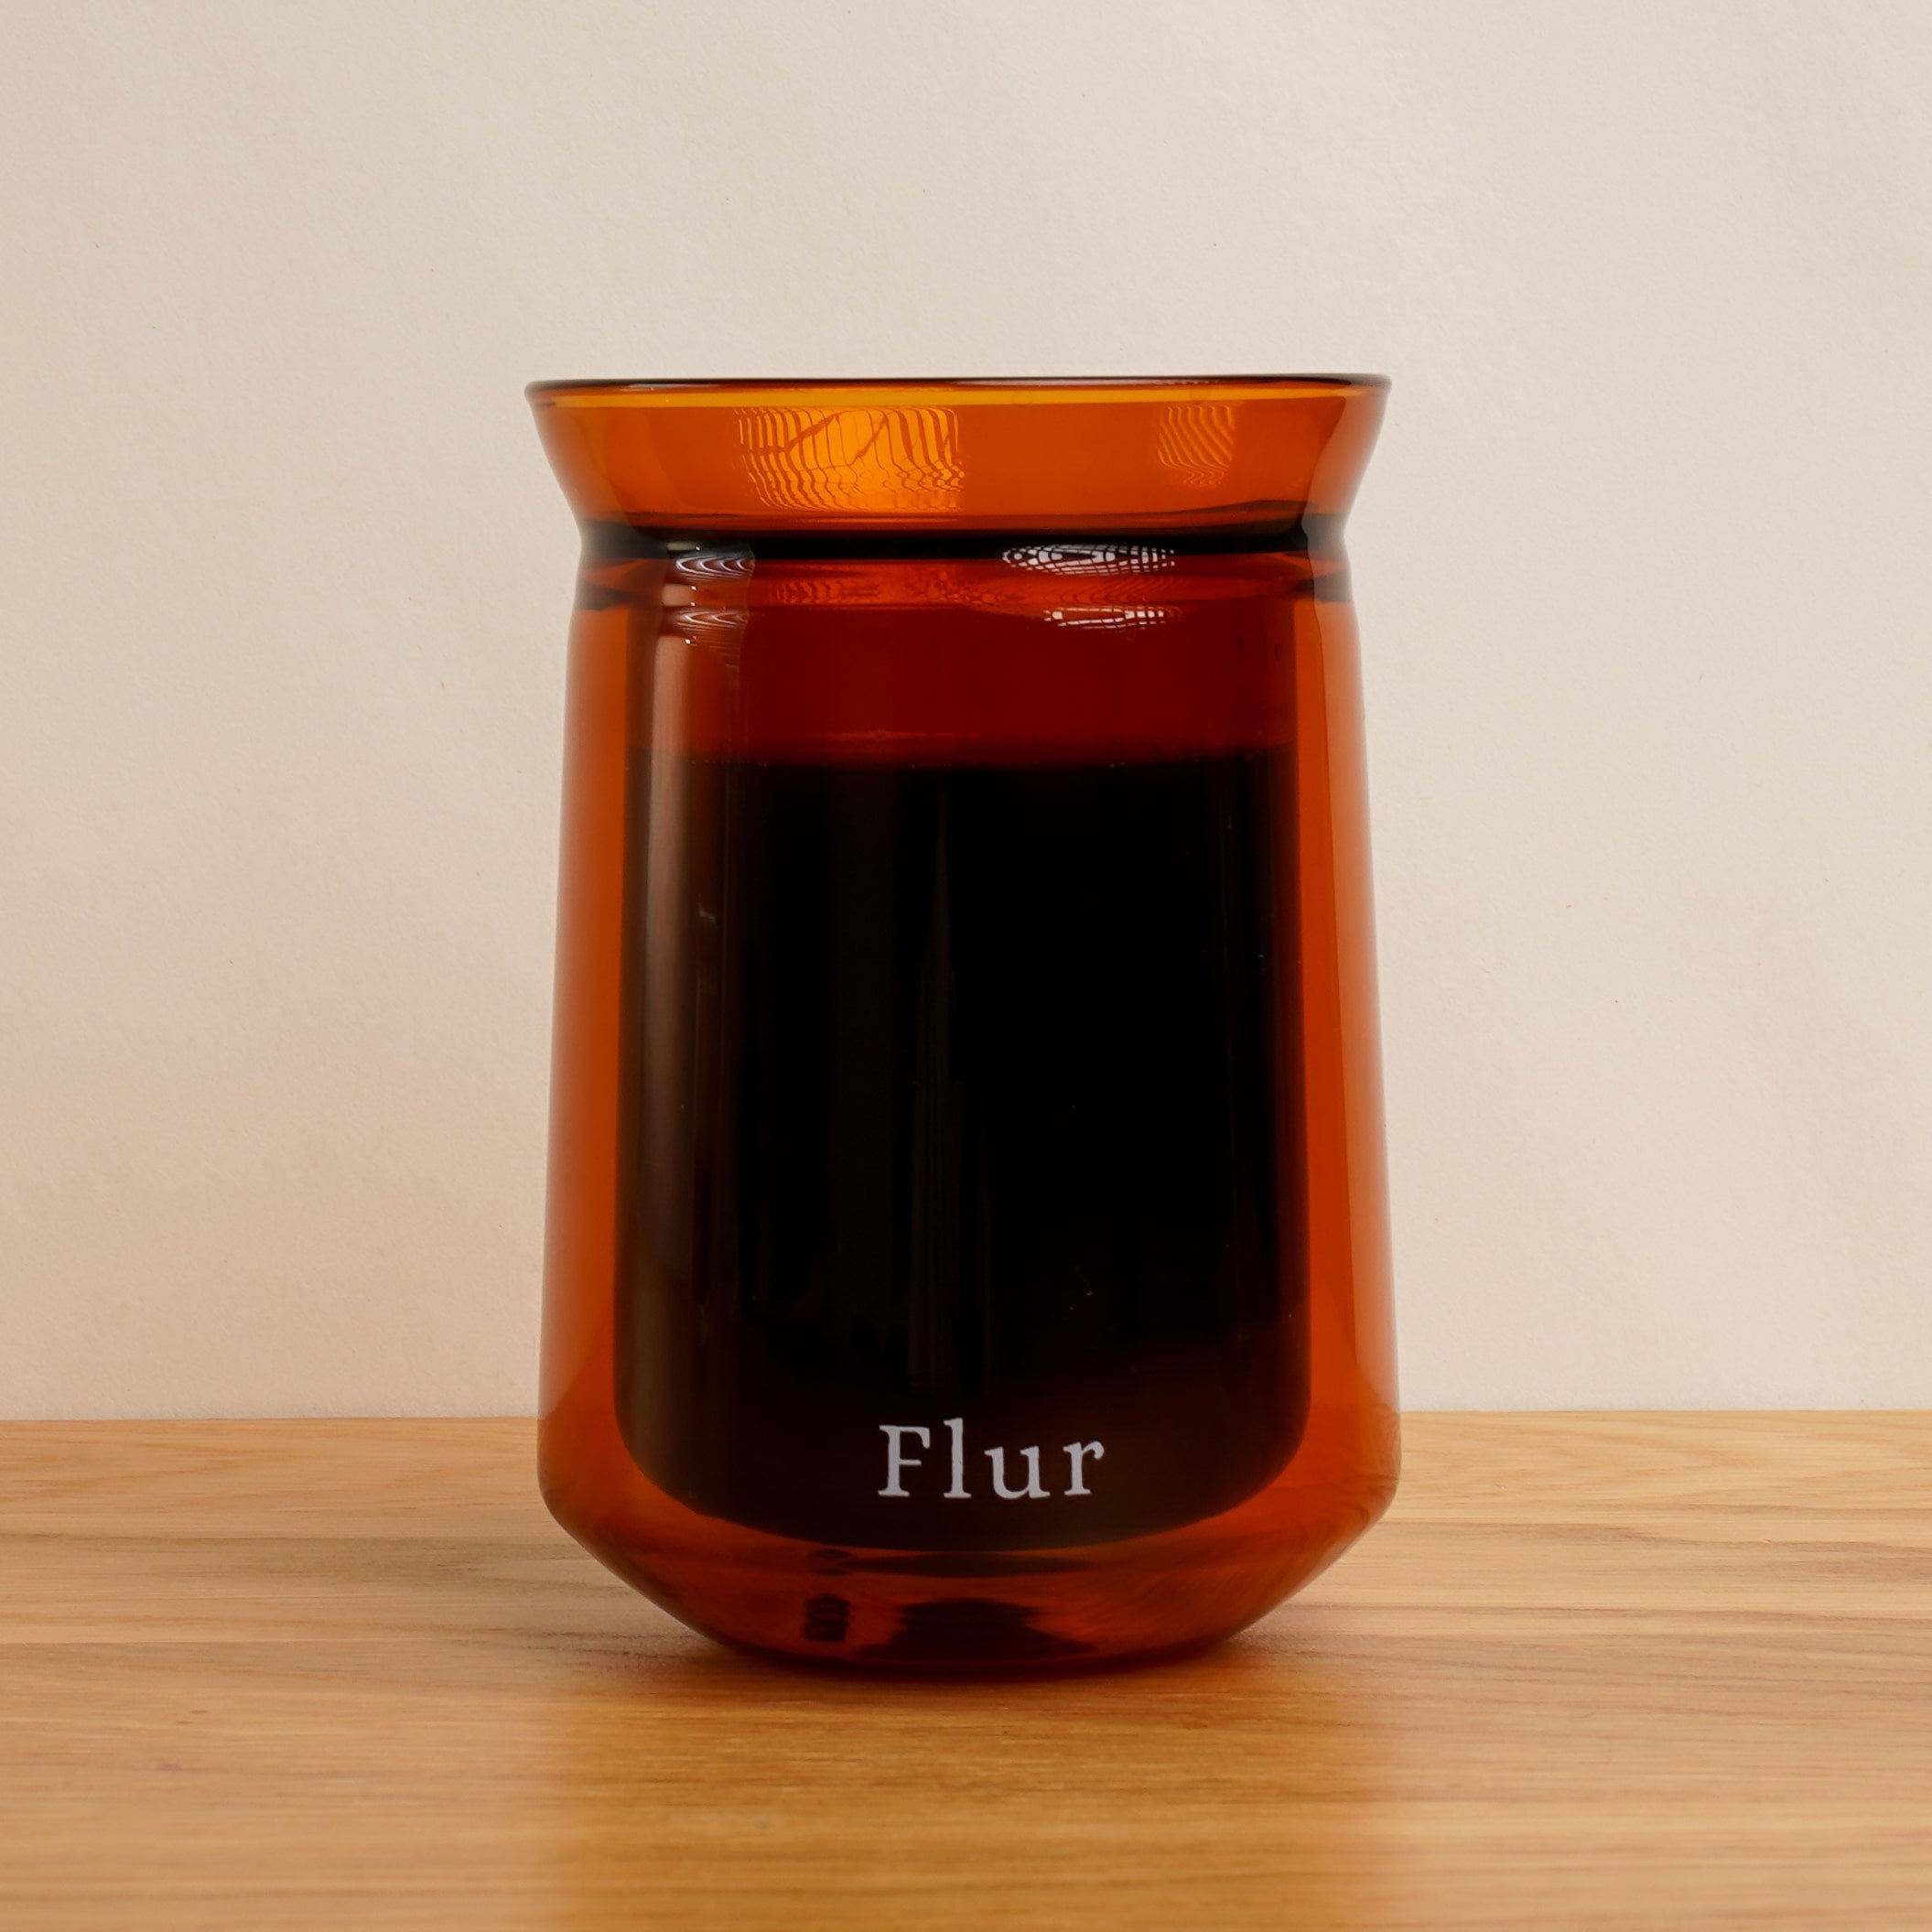 Lets try my new cup from flur glassware #teatime #coffee #espresso